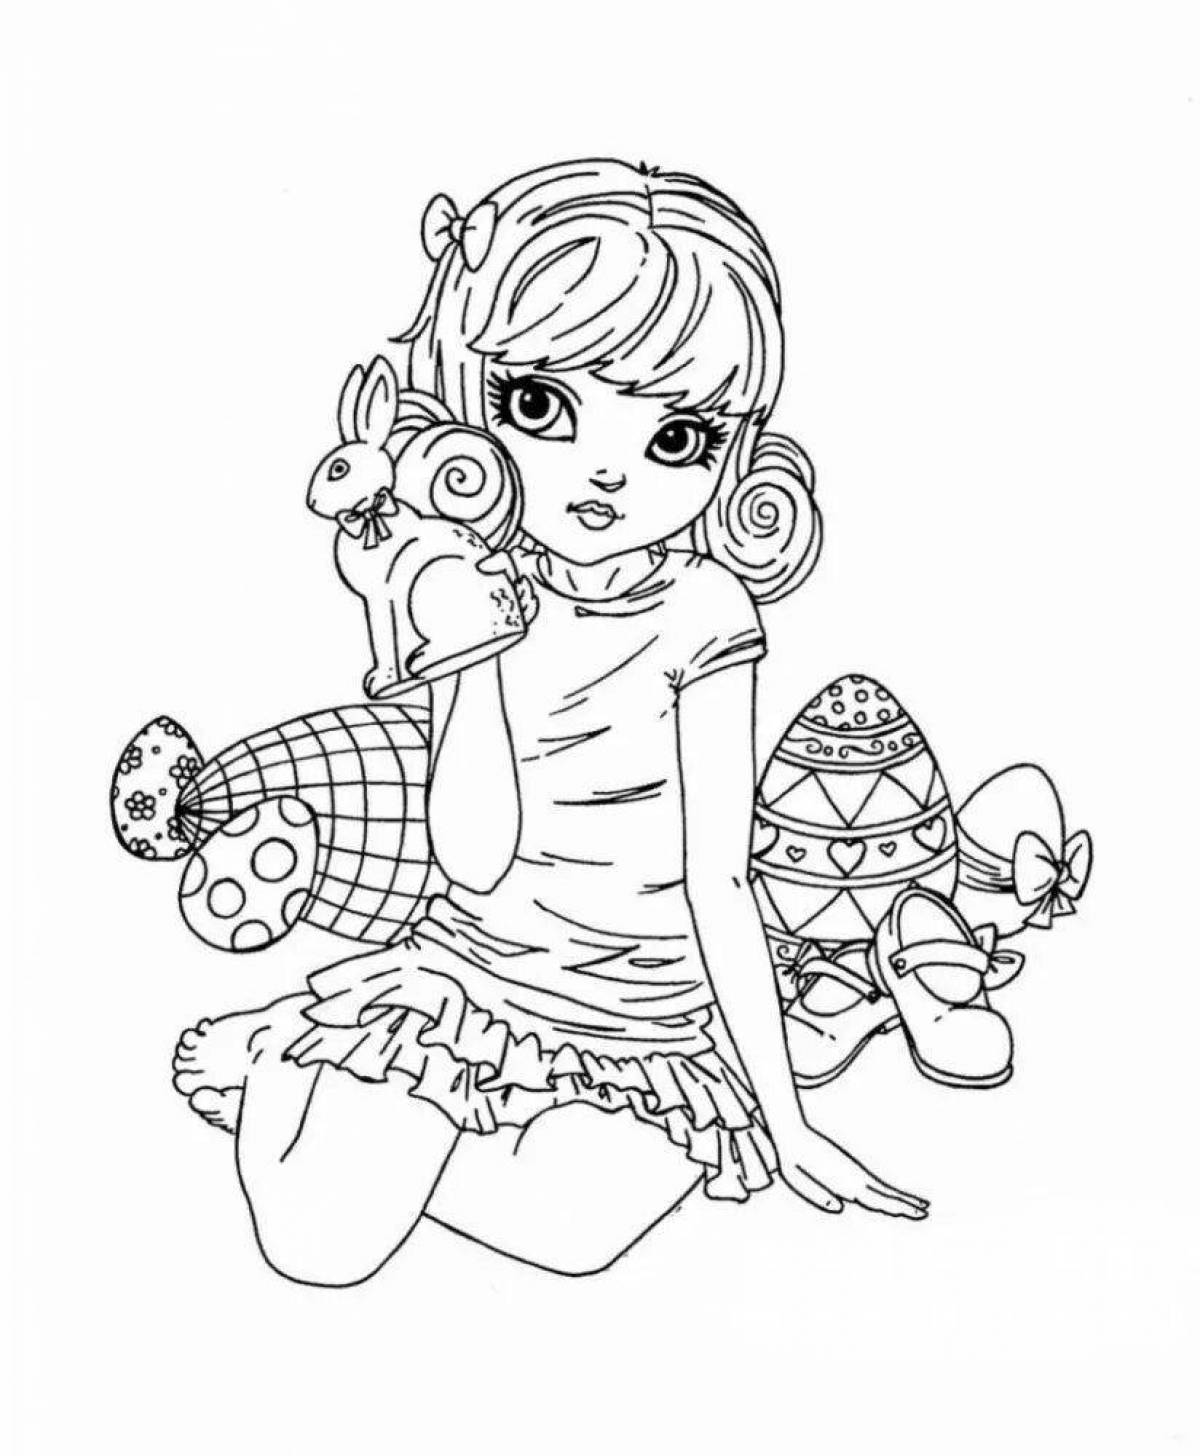 Color-frenzy blythe coloring page